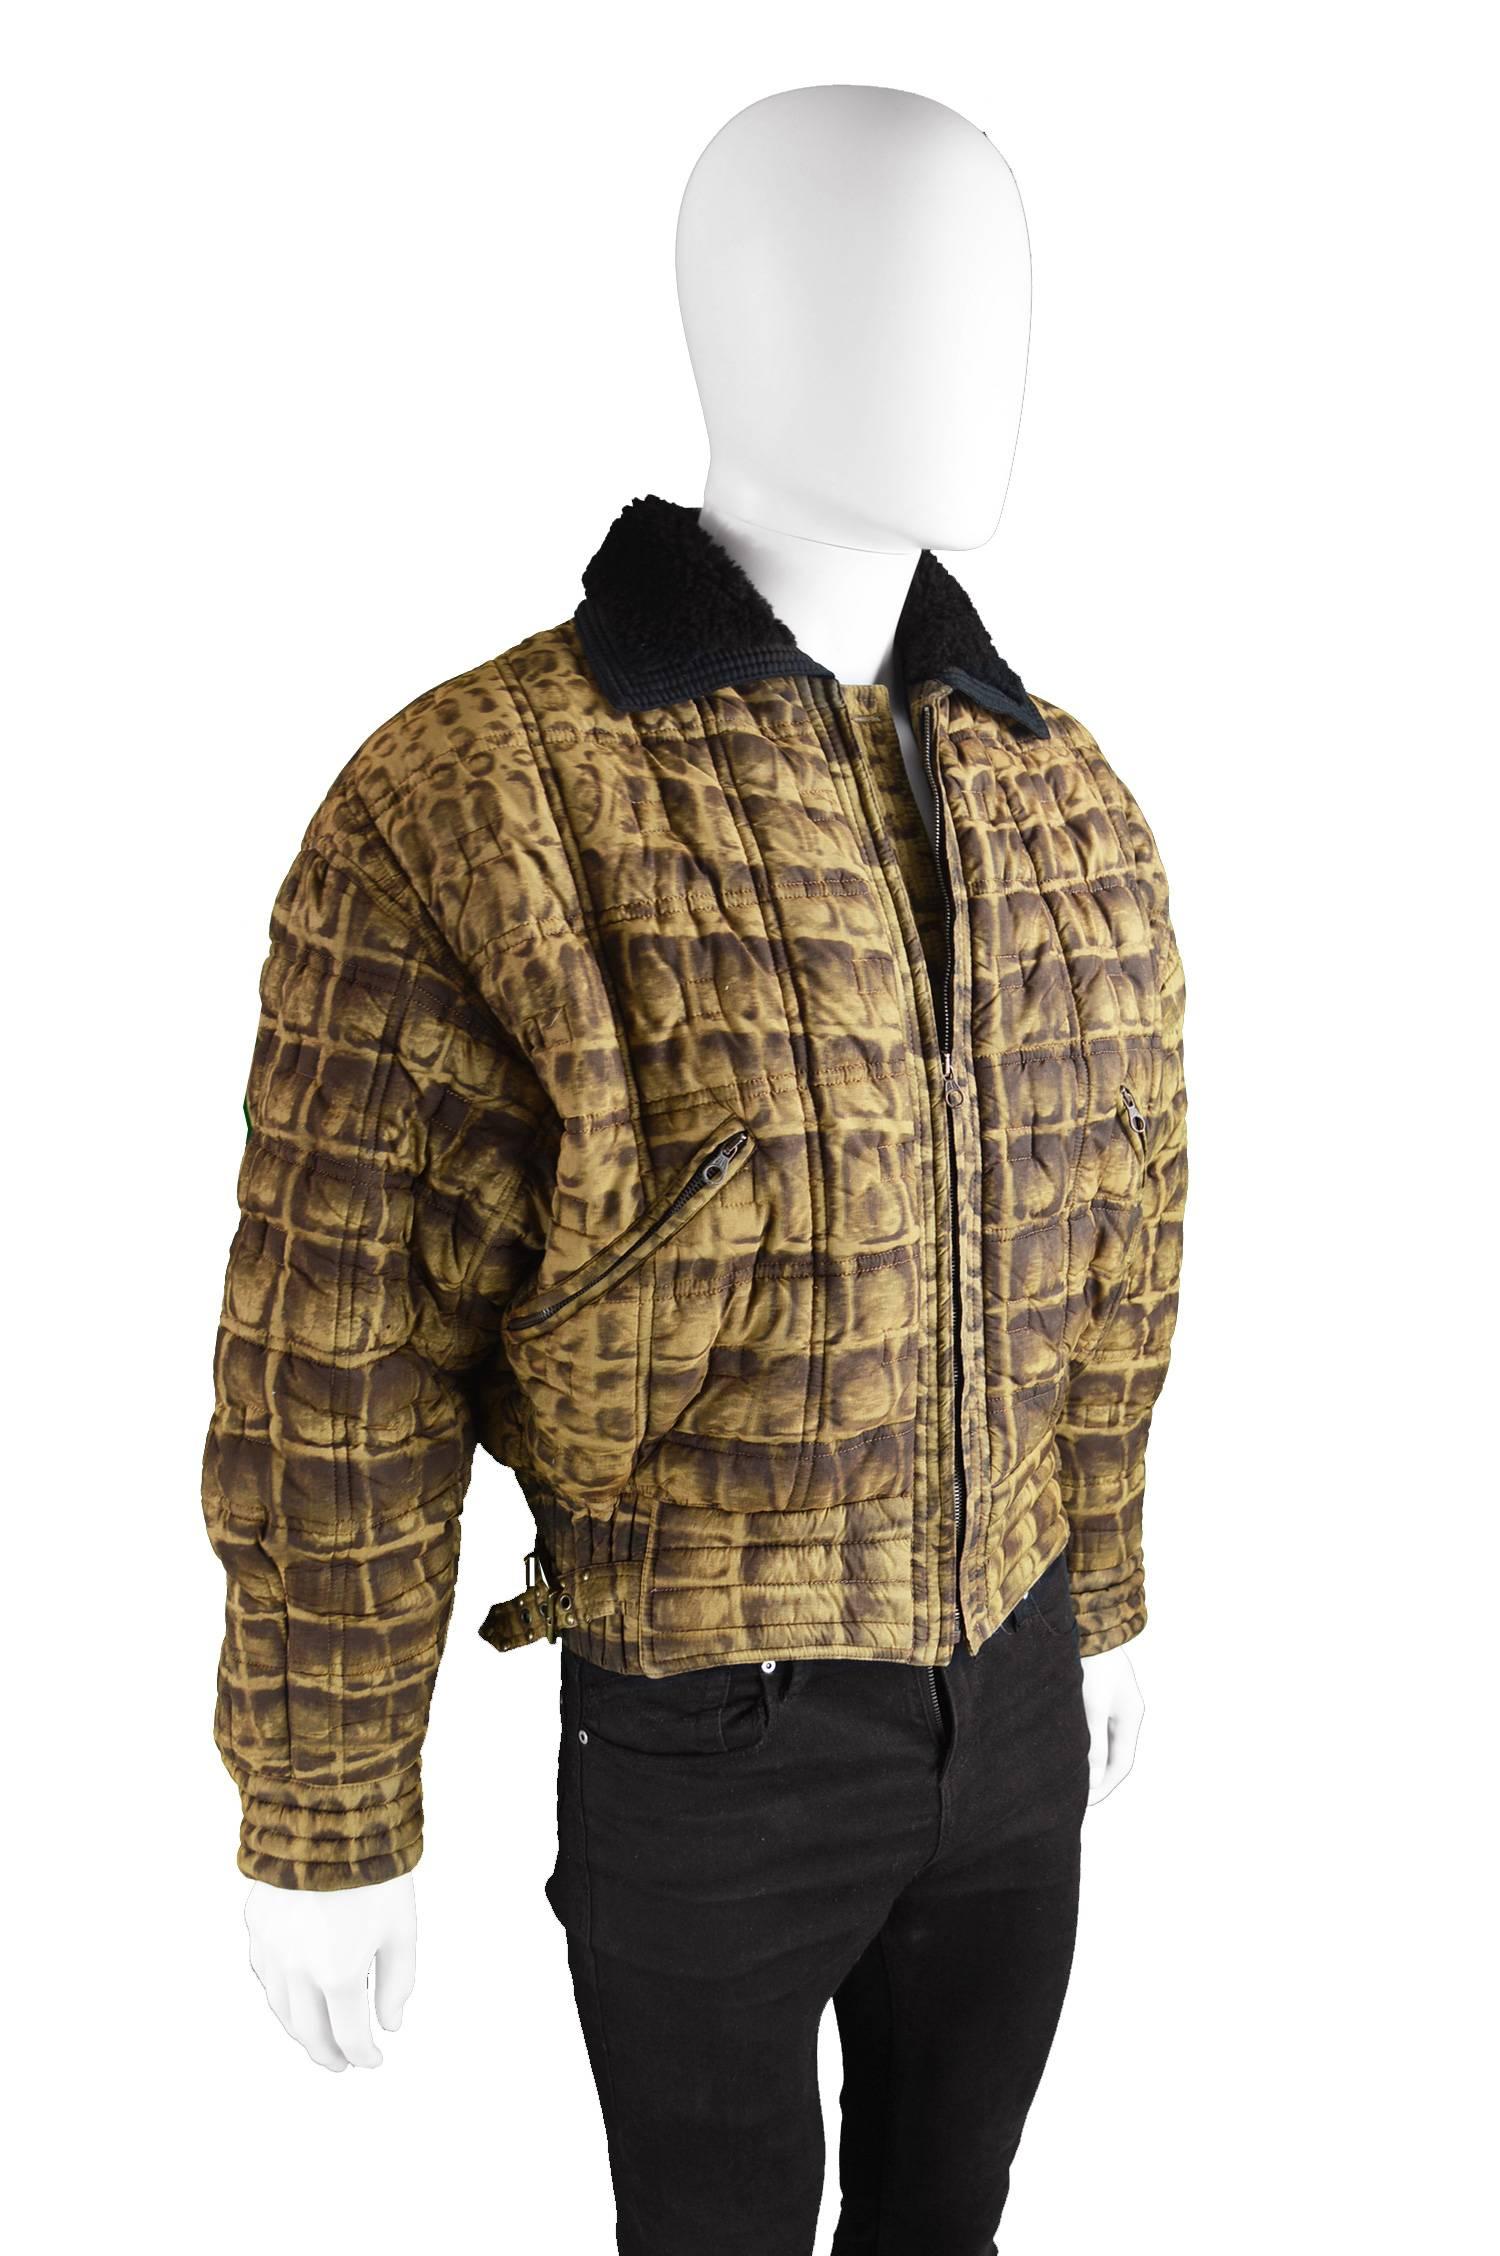 Gianni Versace Men's Quilted Puffer Coat with Shearling Collar, c. 1992 In Excellent Condition For Sale In Doncaster, South Yorkshire